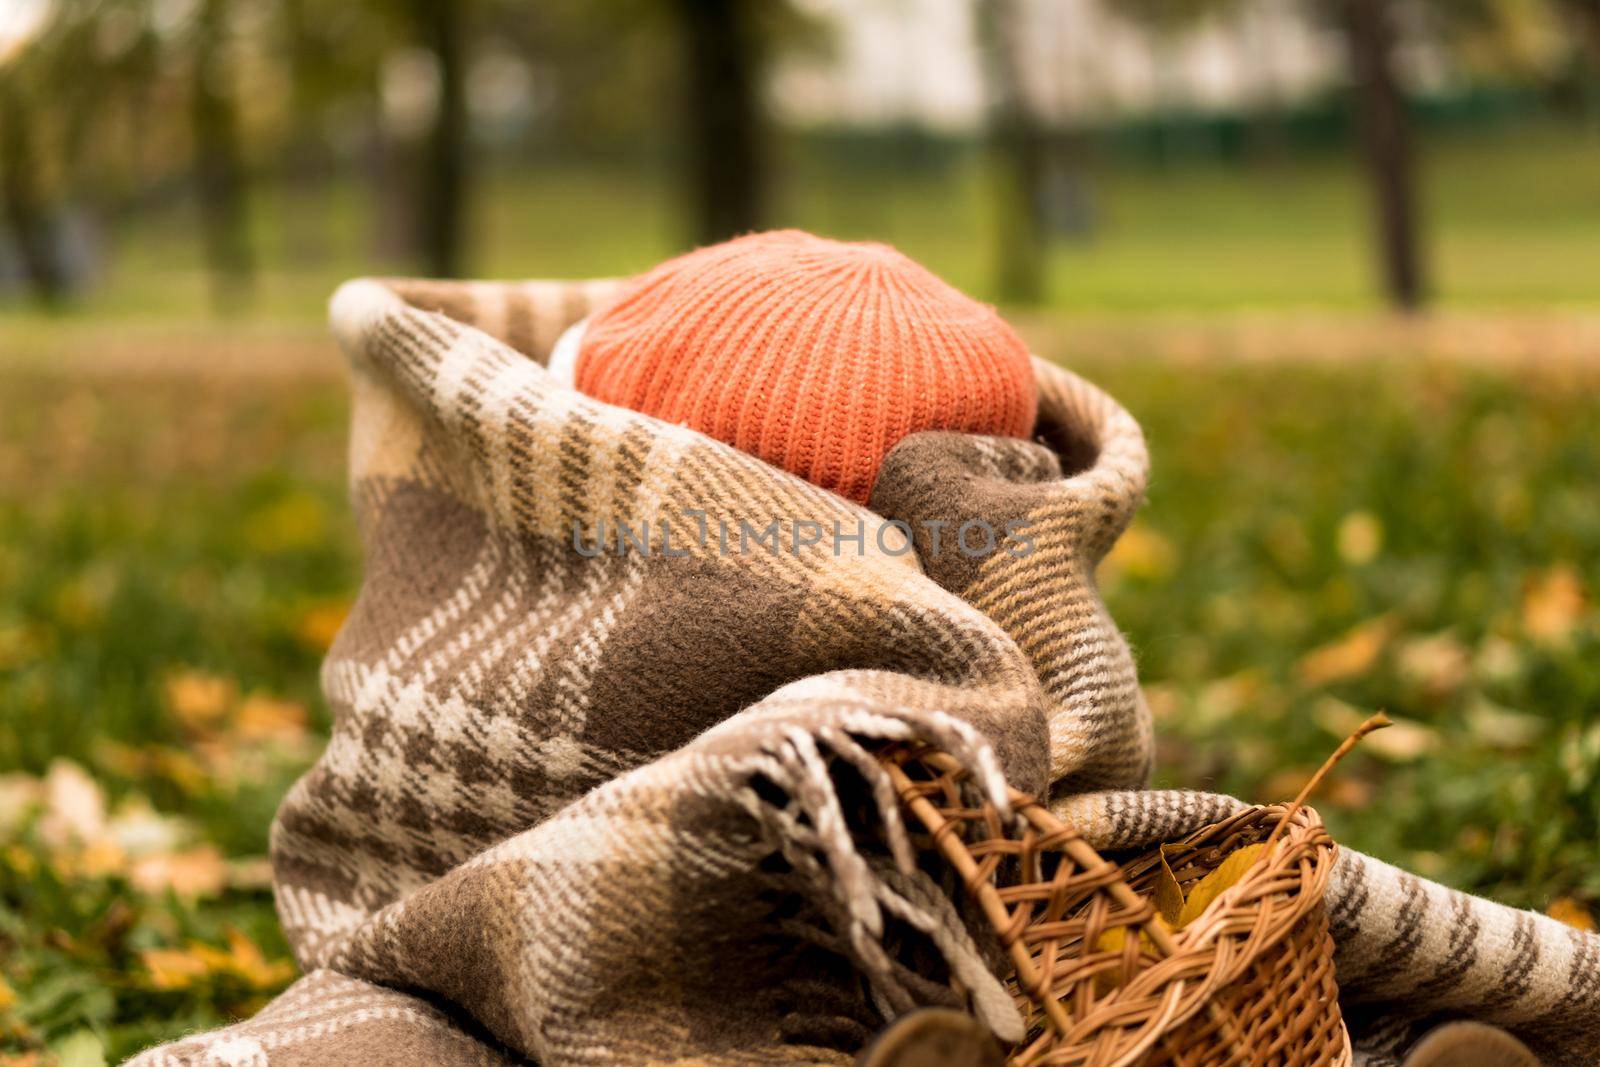 Little Cute Preschool Minor Baby Girl In Orange Beret Wrapped Up With Head In Plaid At Yellow Fallen Leaves On Basket Hid From Cold Weather In Fall Park. Childhood, Family, Motherhood, Autumn Concept.